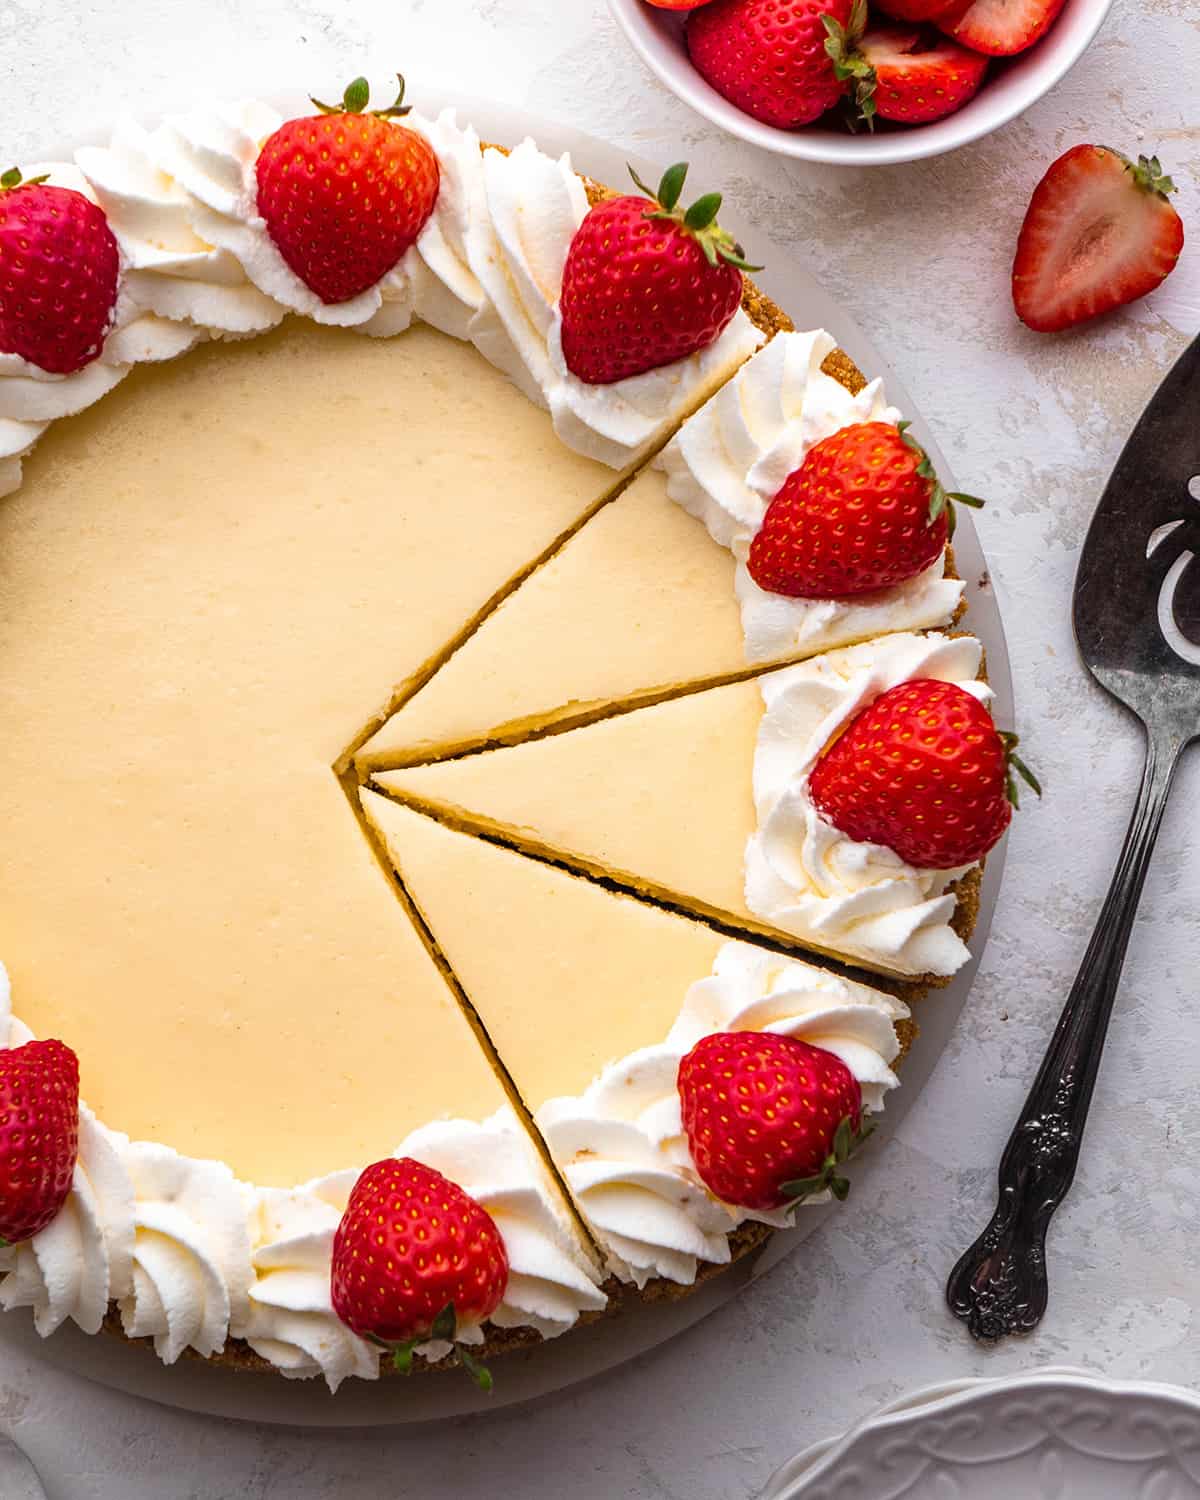 a cheesecake decorated with whipped cream and strawberries with 3 slices cut out of it